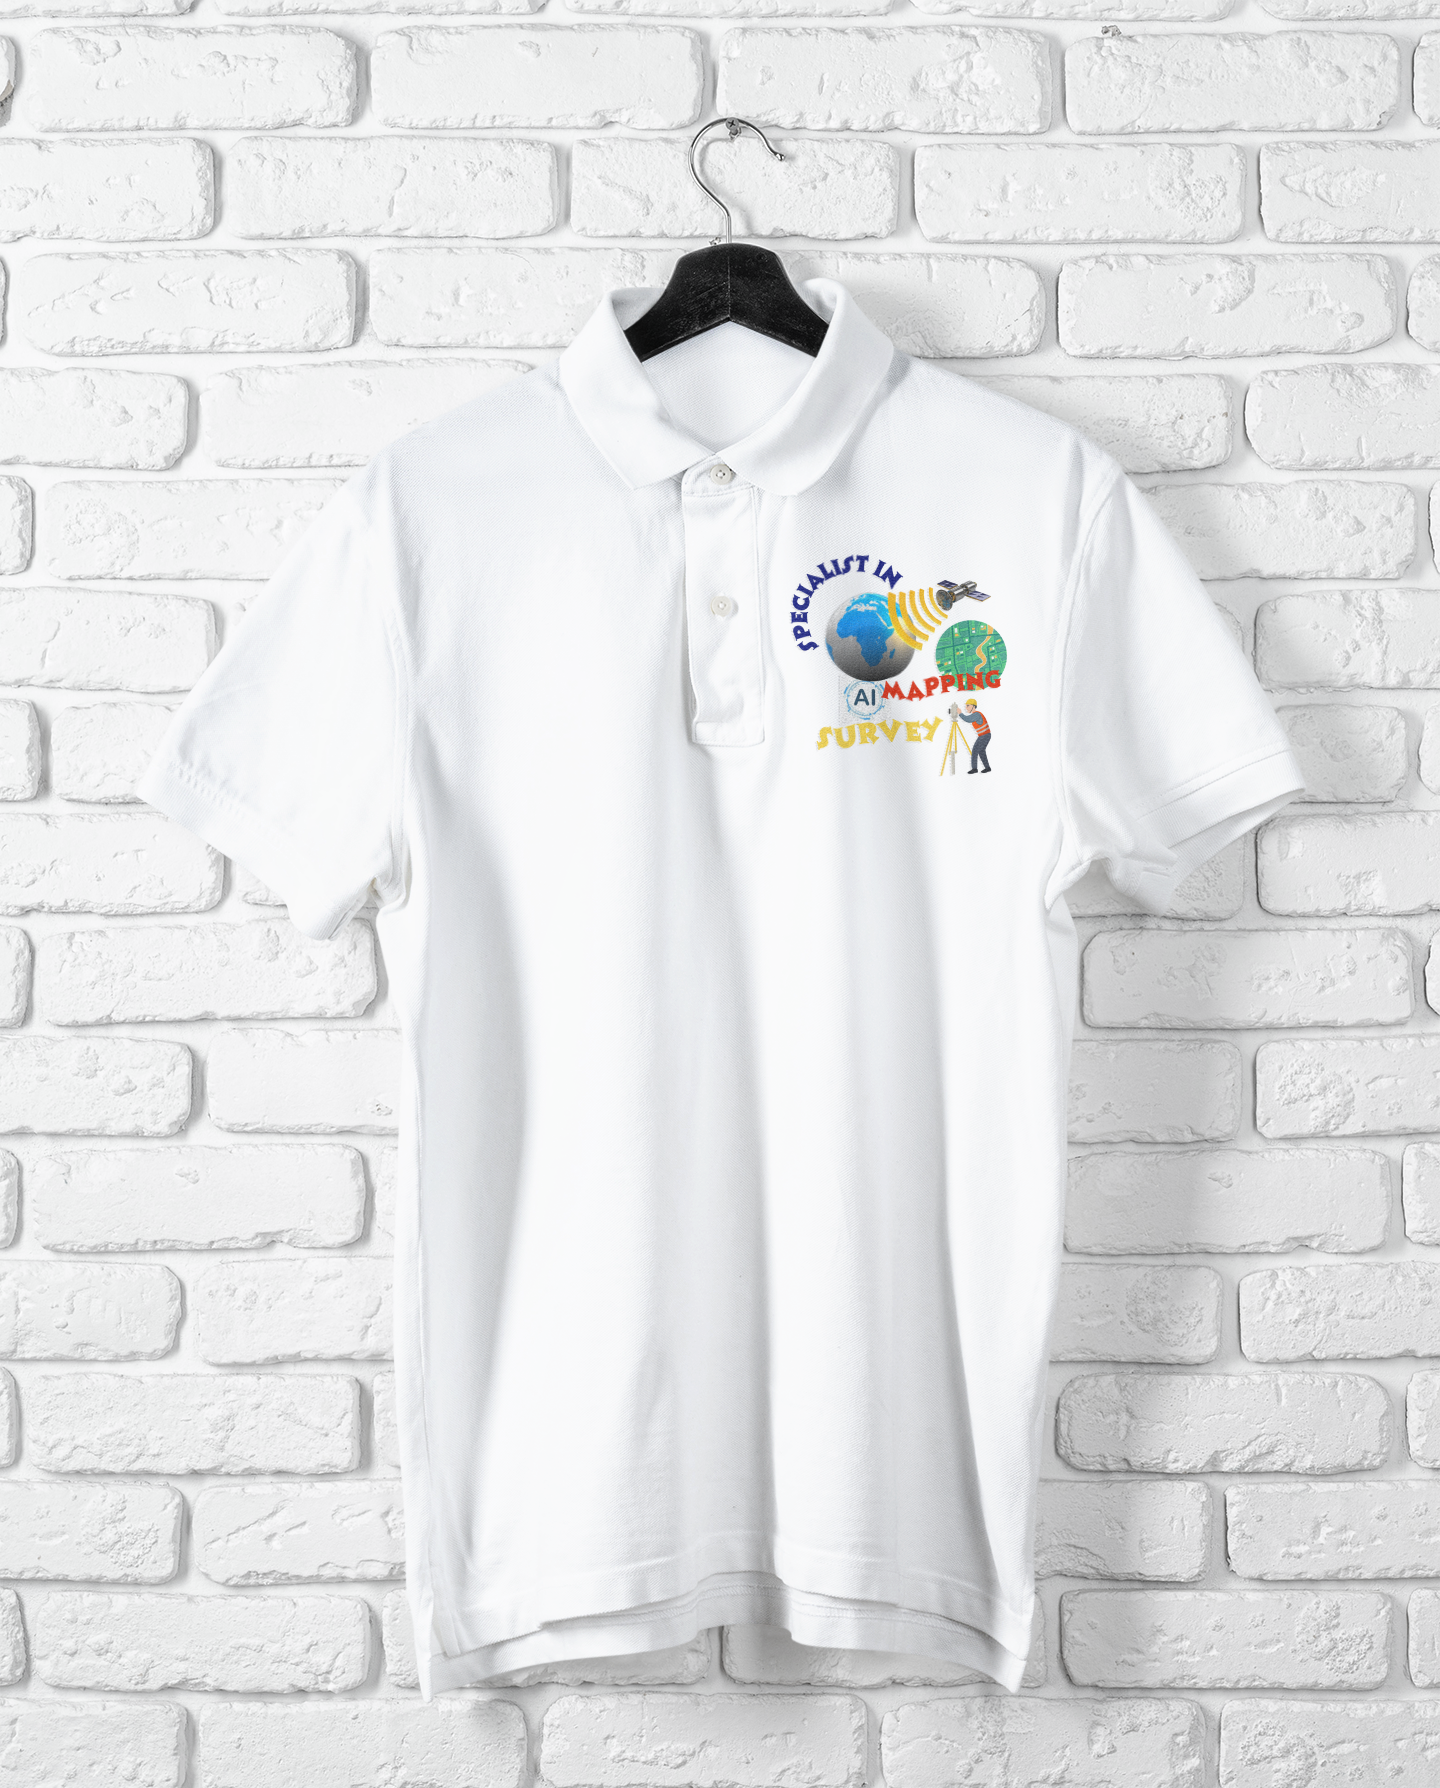 SPECIALIST IN MAPPING POLO T SHIRT